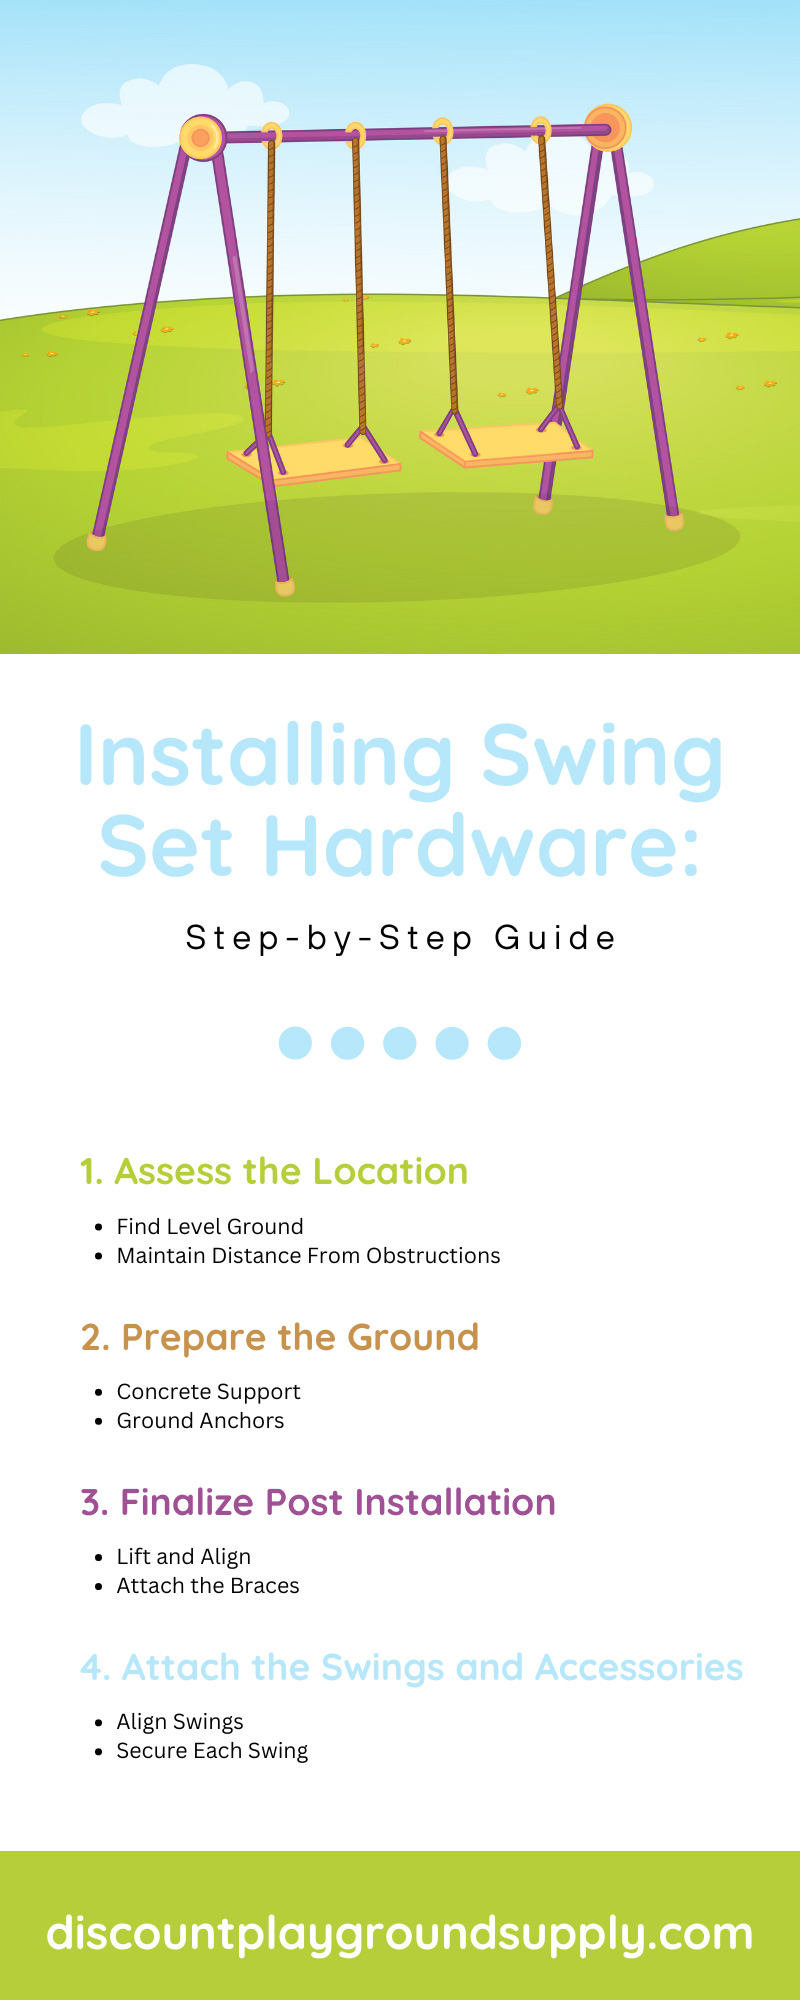 Installing Swing Set Hardware: Step-by-Step Guide